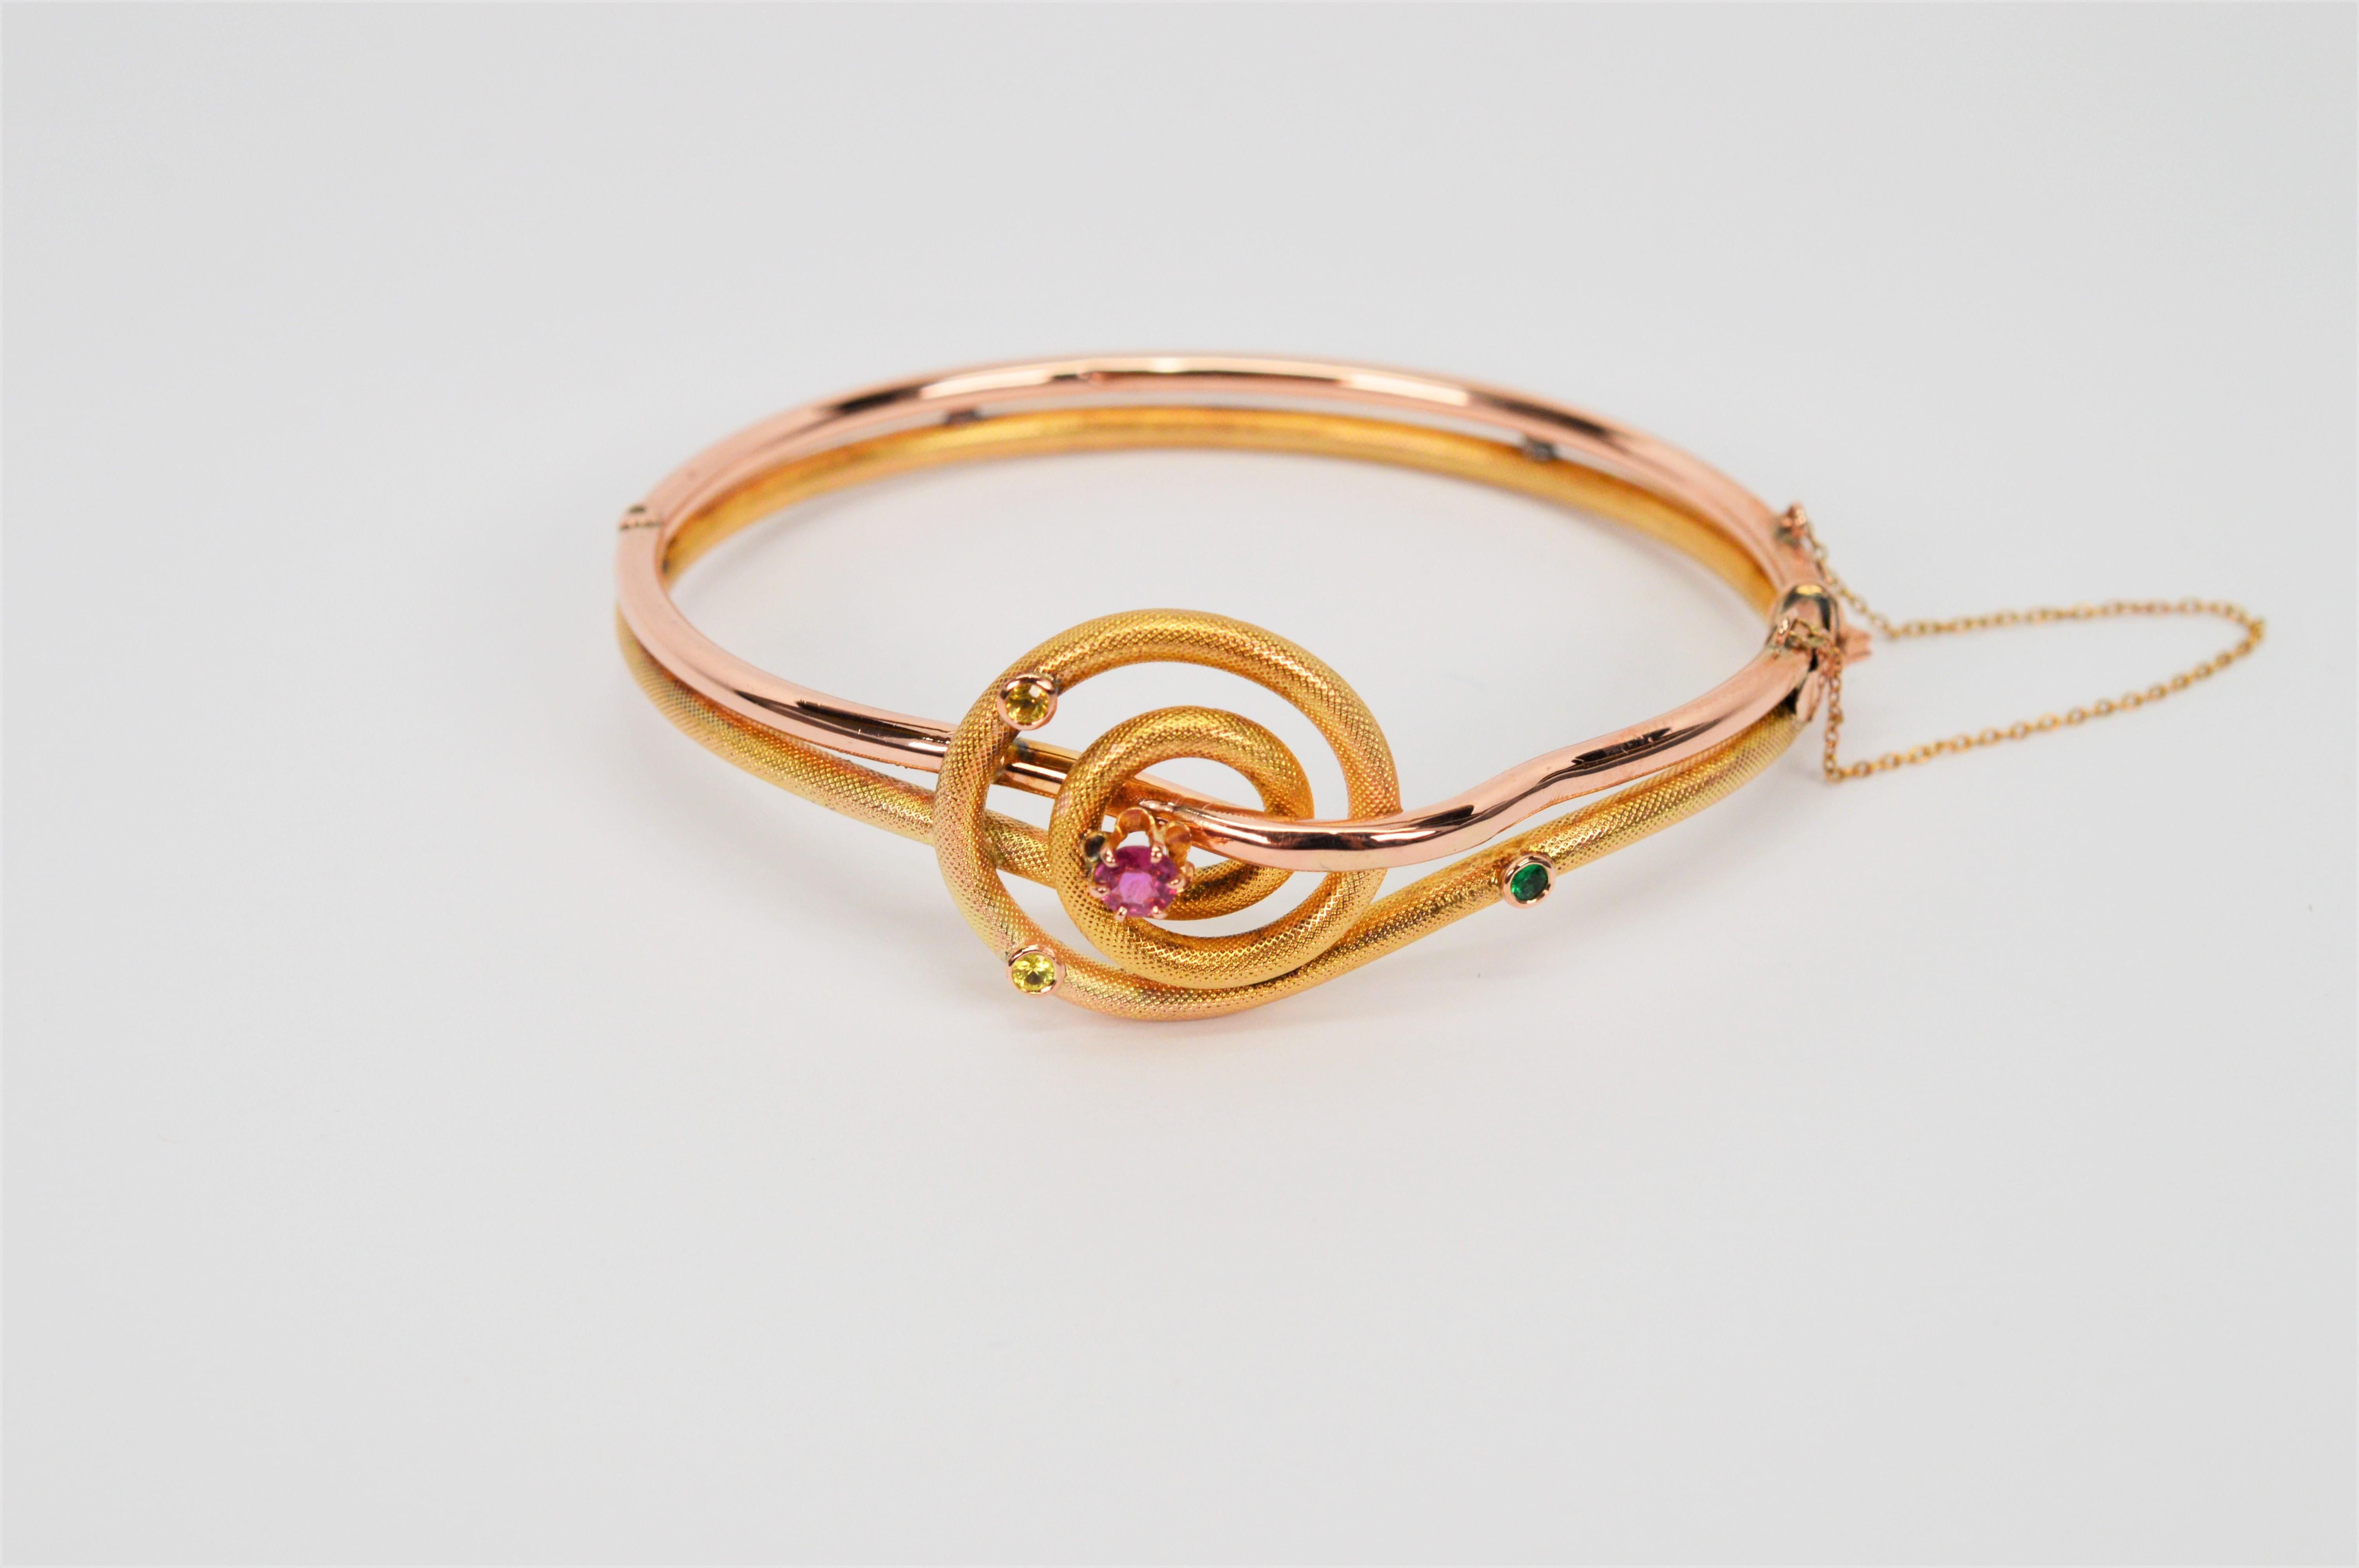 Vintage Yellow Rose Gold Bangle Bracelet with Gemstone Accents  For Sale 3